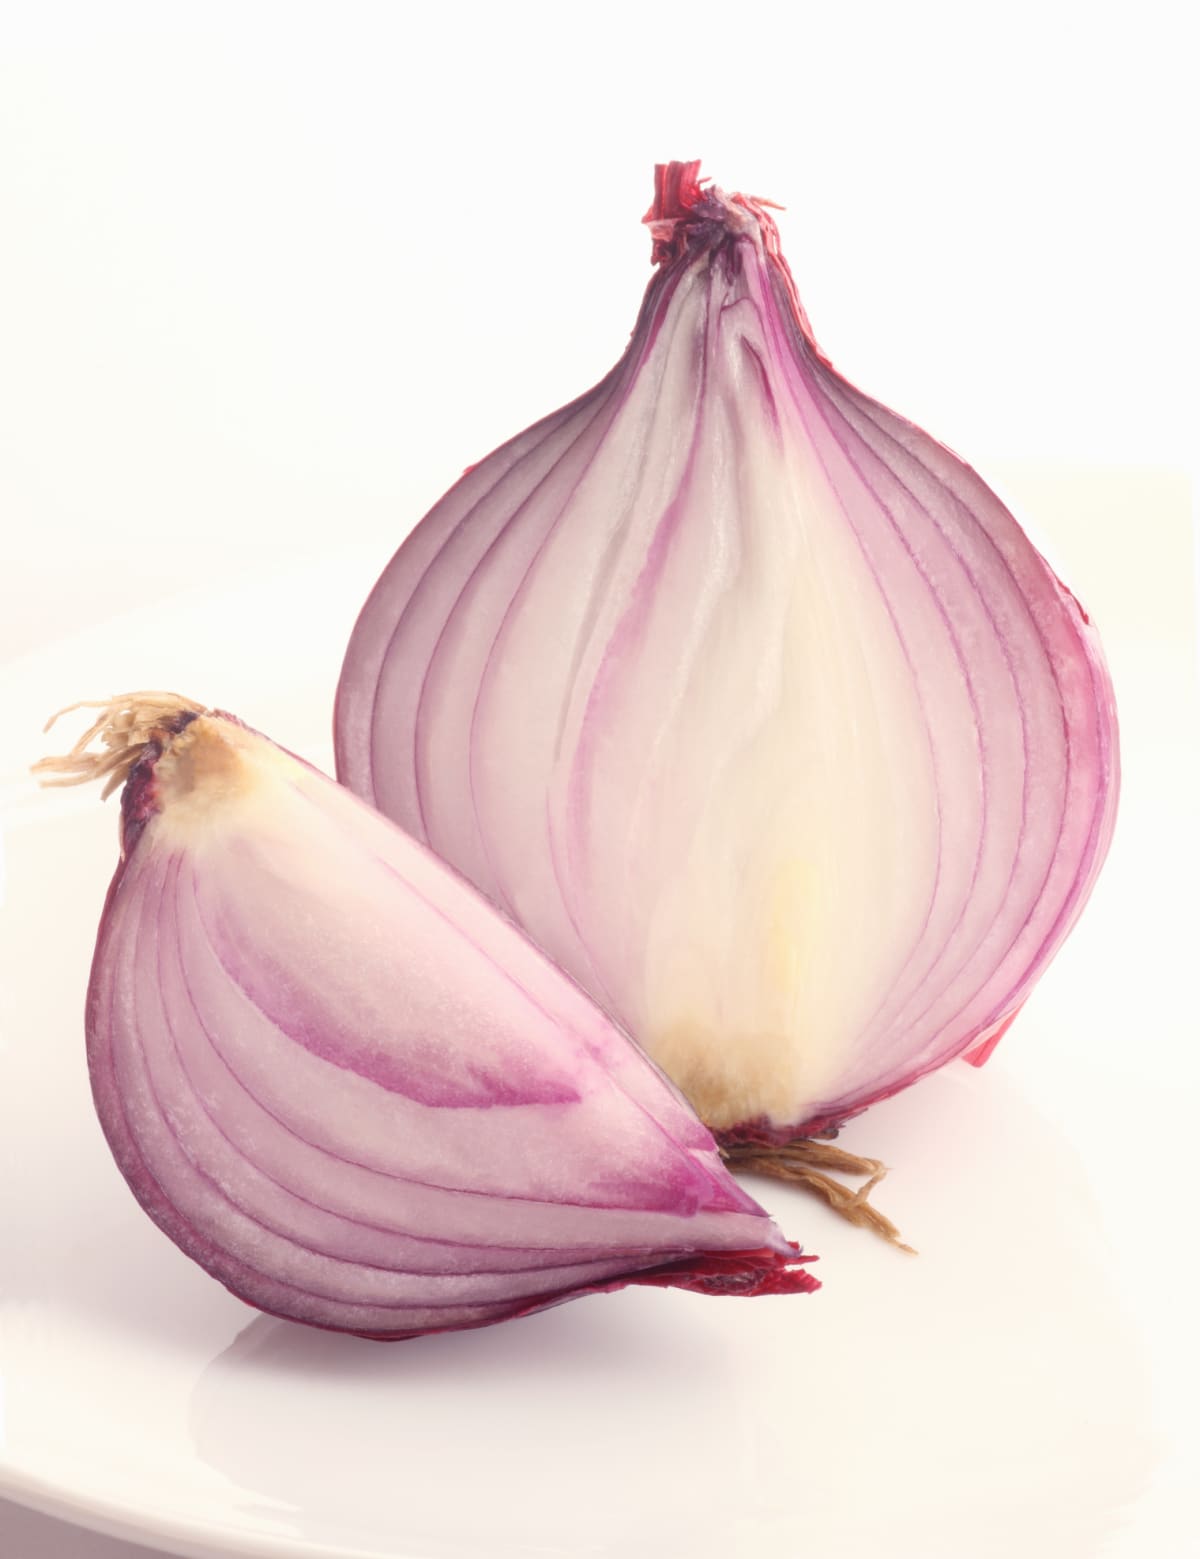 Half a red onion showing layers inside, with a quarter of an onion placed in front of it, on a white background